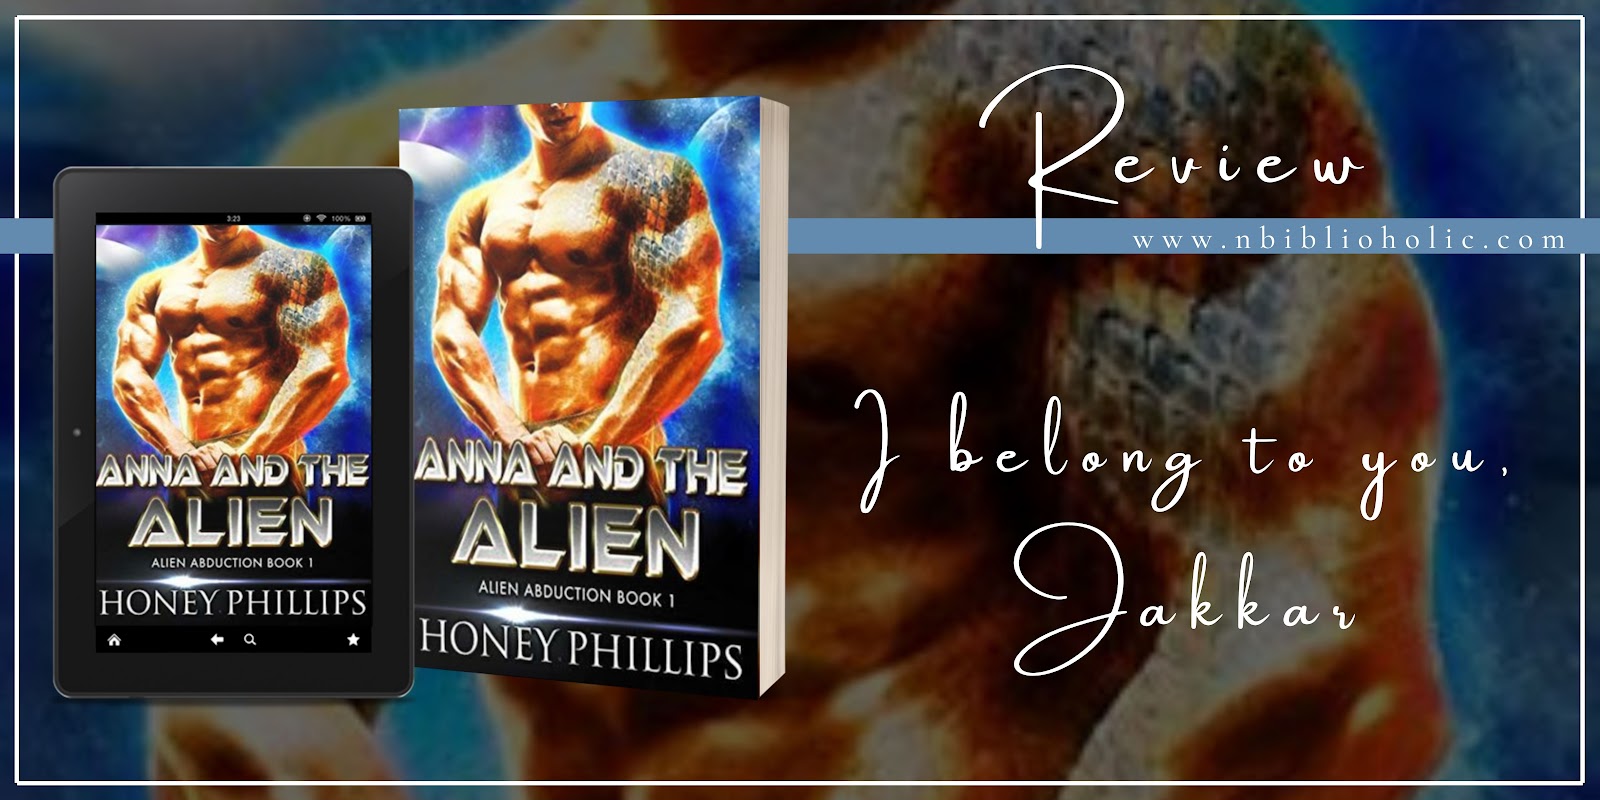 Anna and the Alien by Honey Phillips